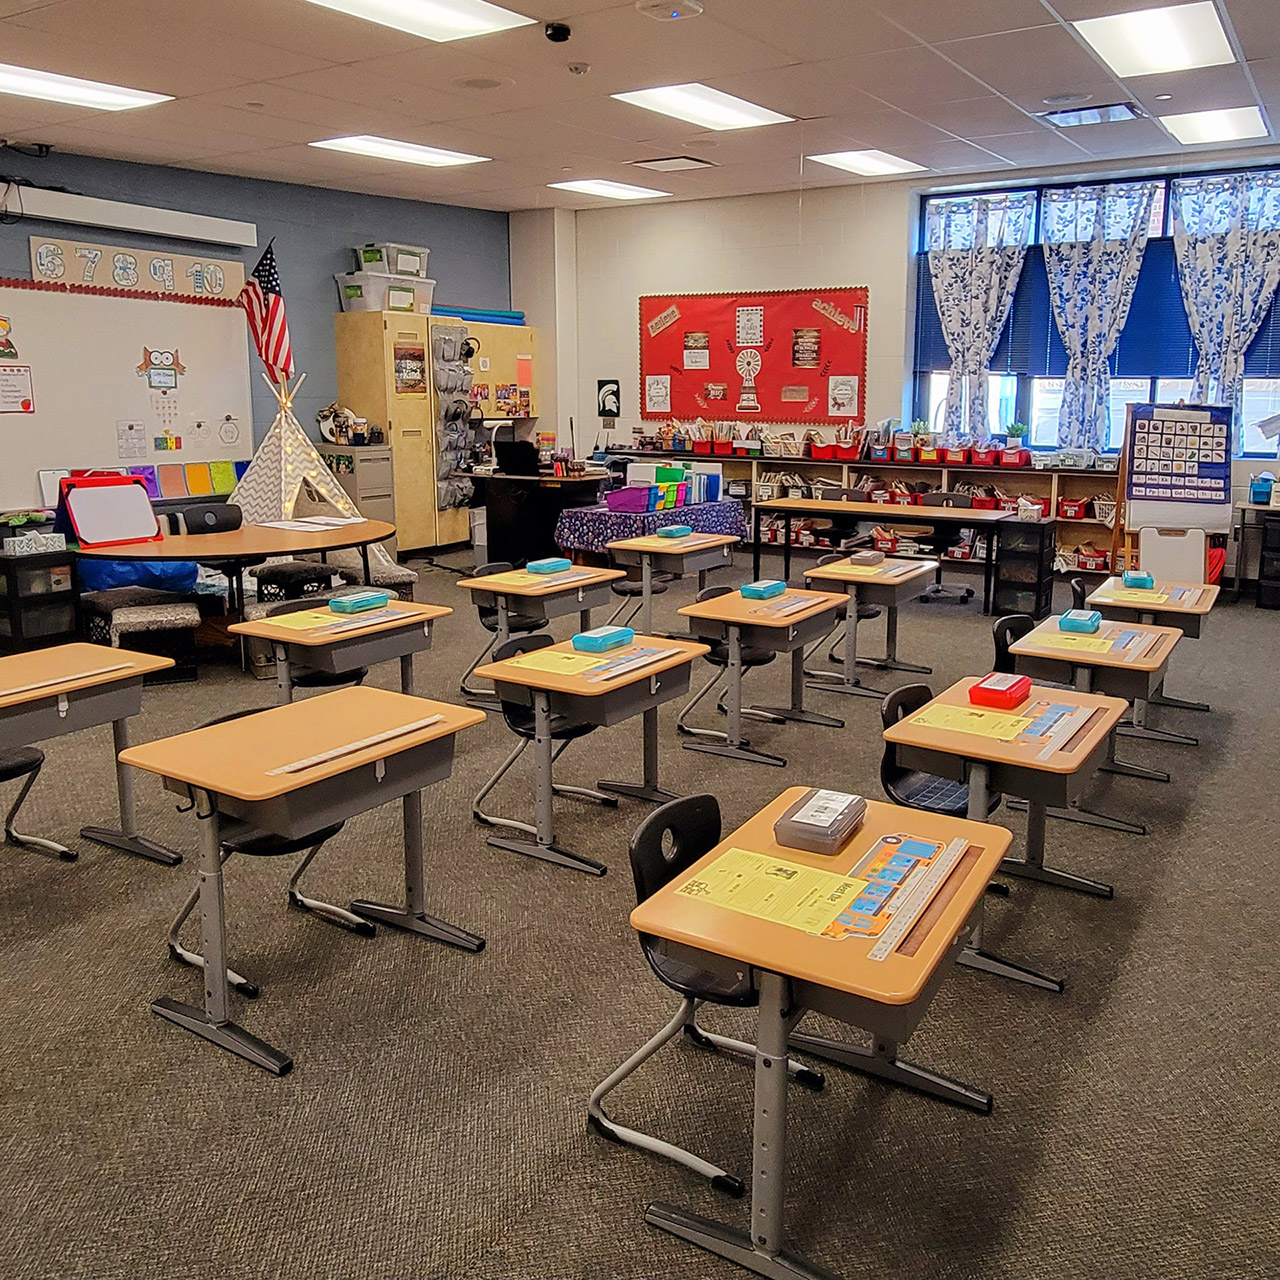 Her special education classroom in Cassopolis